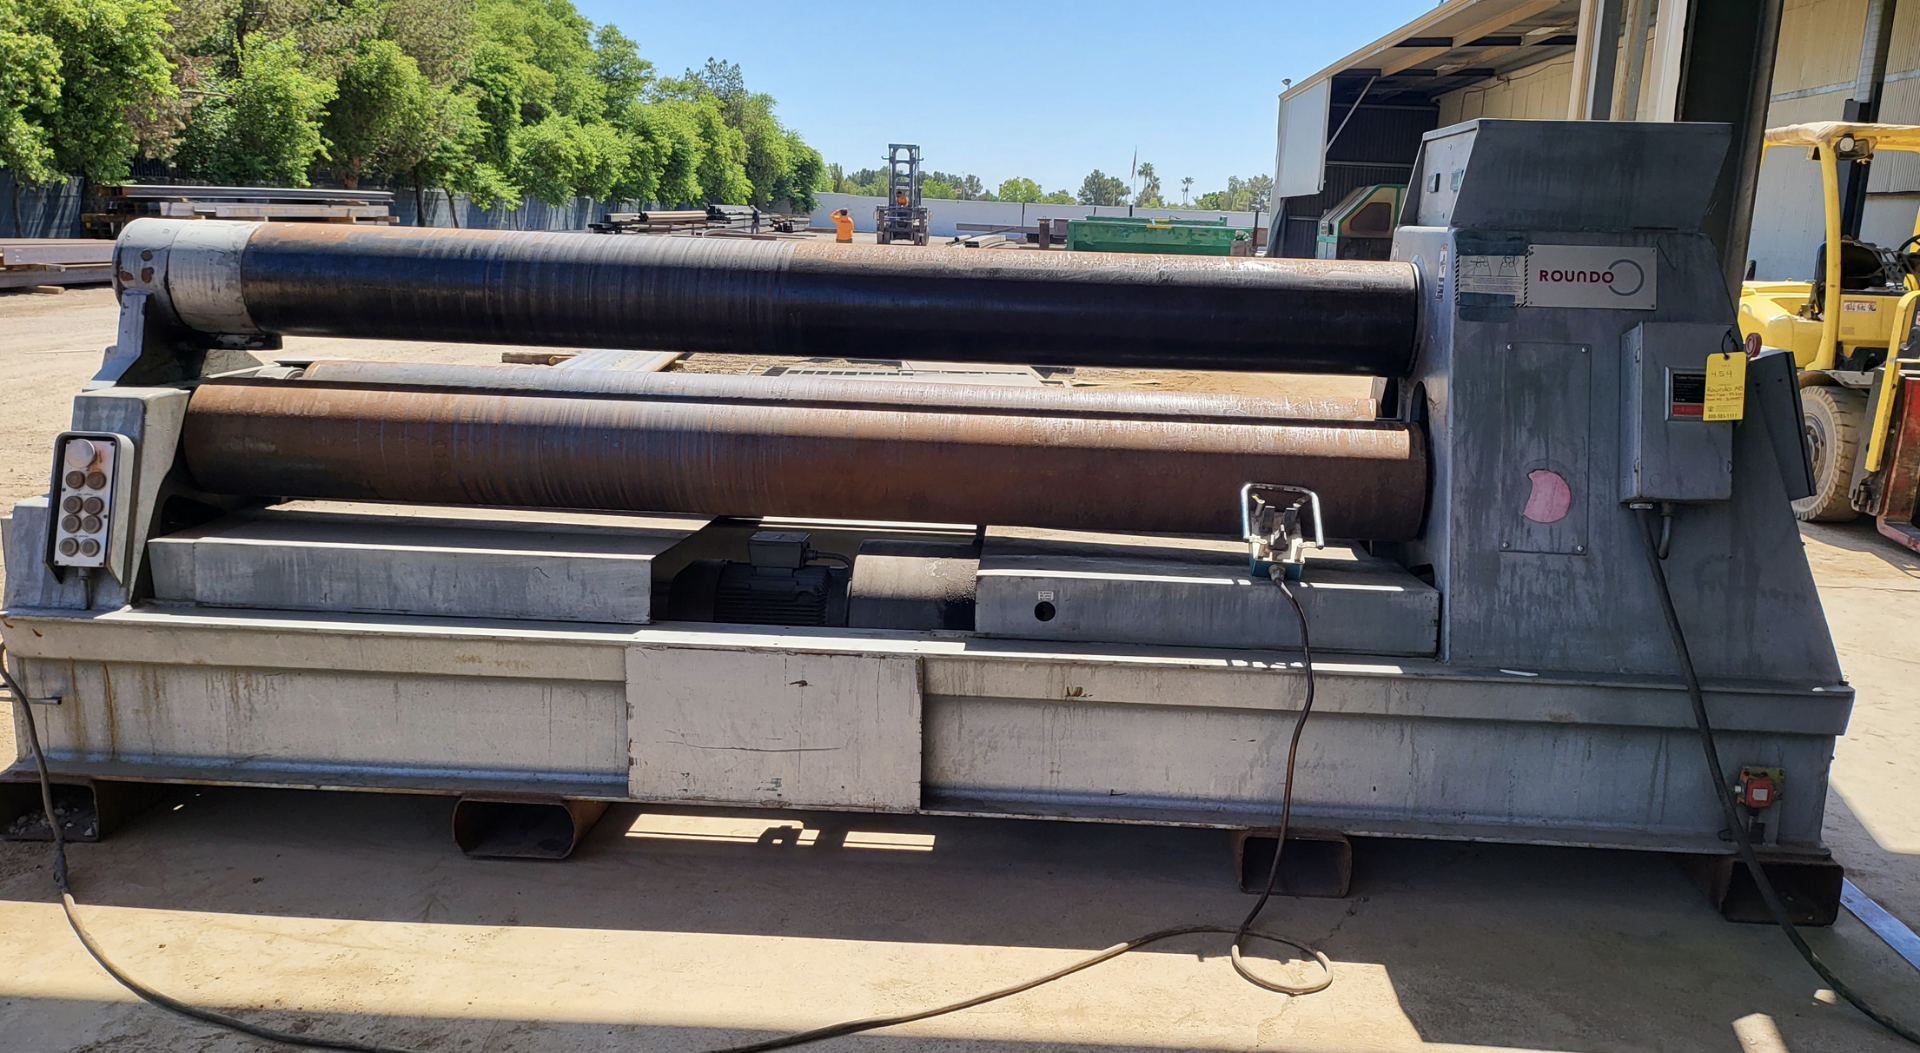 Roundo PS 310 Plate Roll, Capacity: 10' x 5/8", 3 Roll, DOM: 1989 (LOCATION: Chandler, AZ) - Image 2 of 5